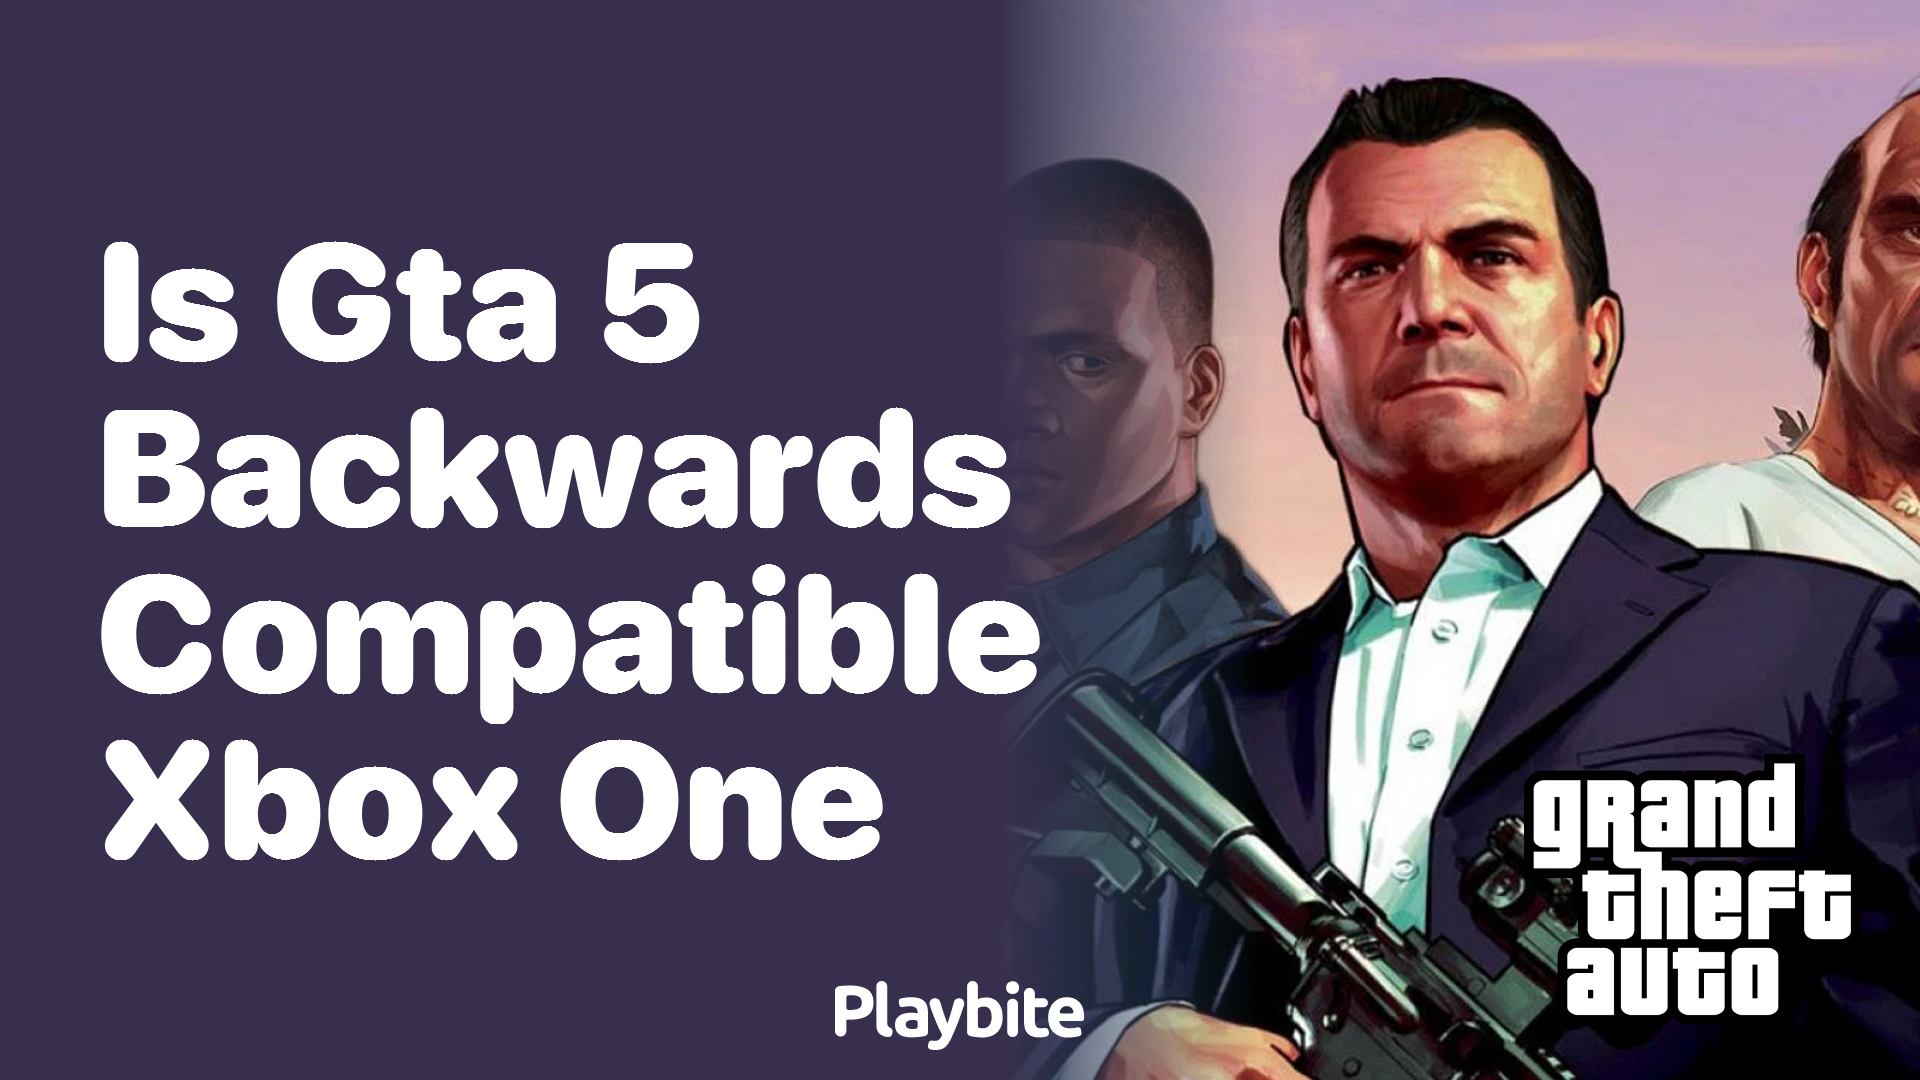 Is GTA 5 backwards compatible on Xbox One?